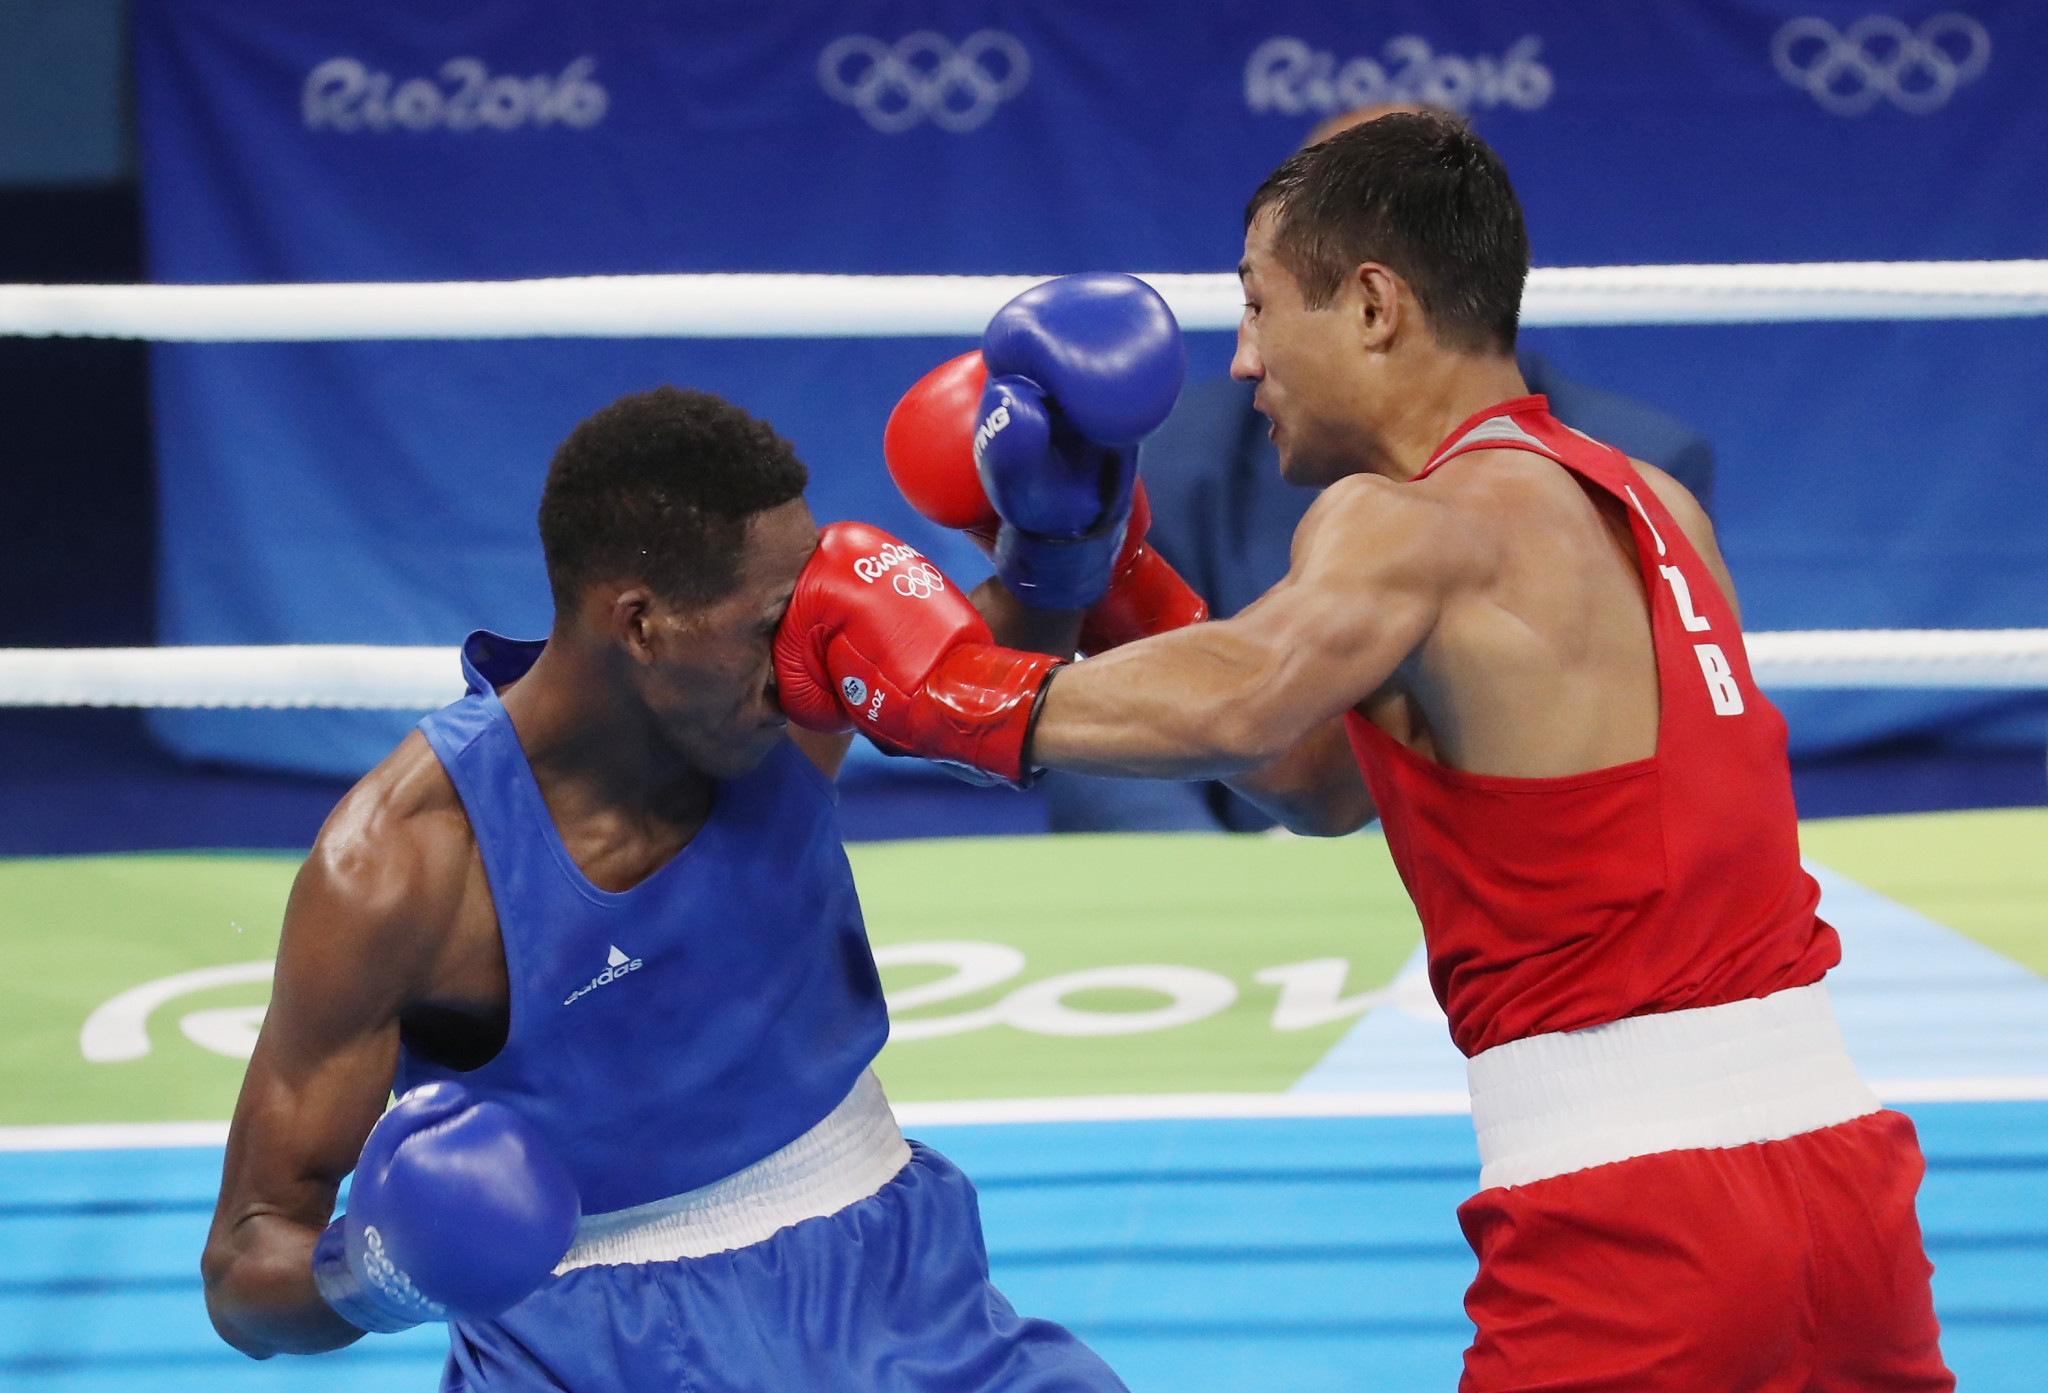 Boxing is currently fighting for its place on the Olympic programme ©Getty Images